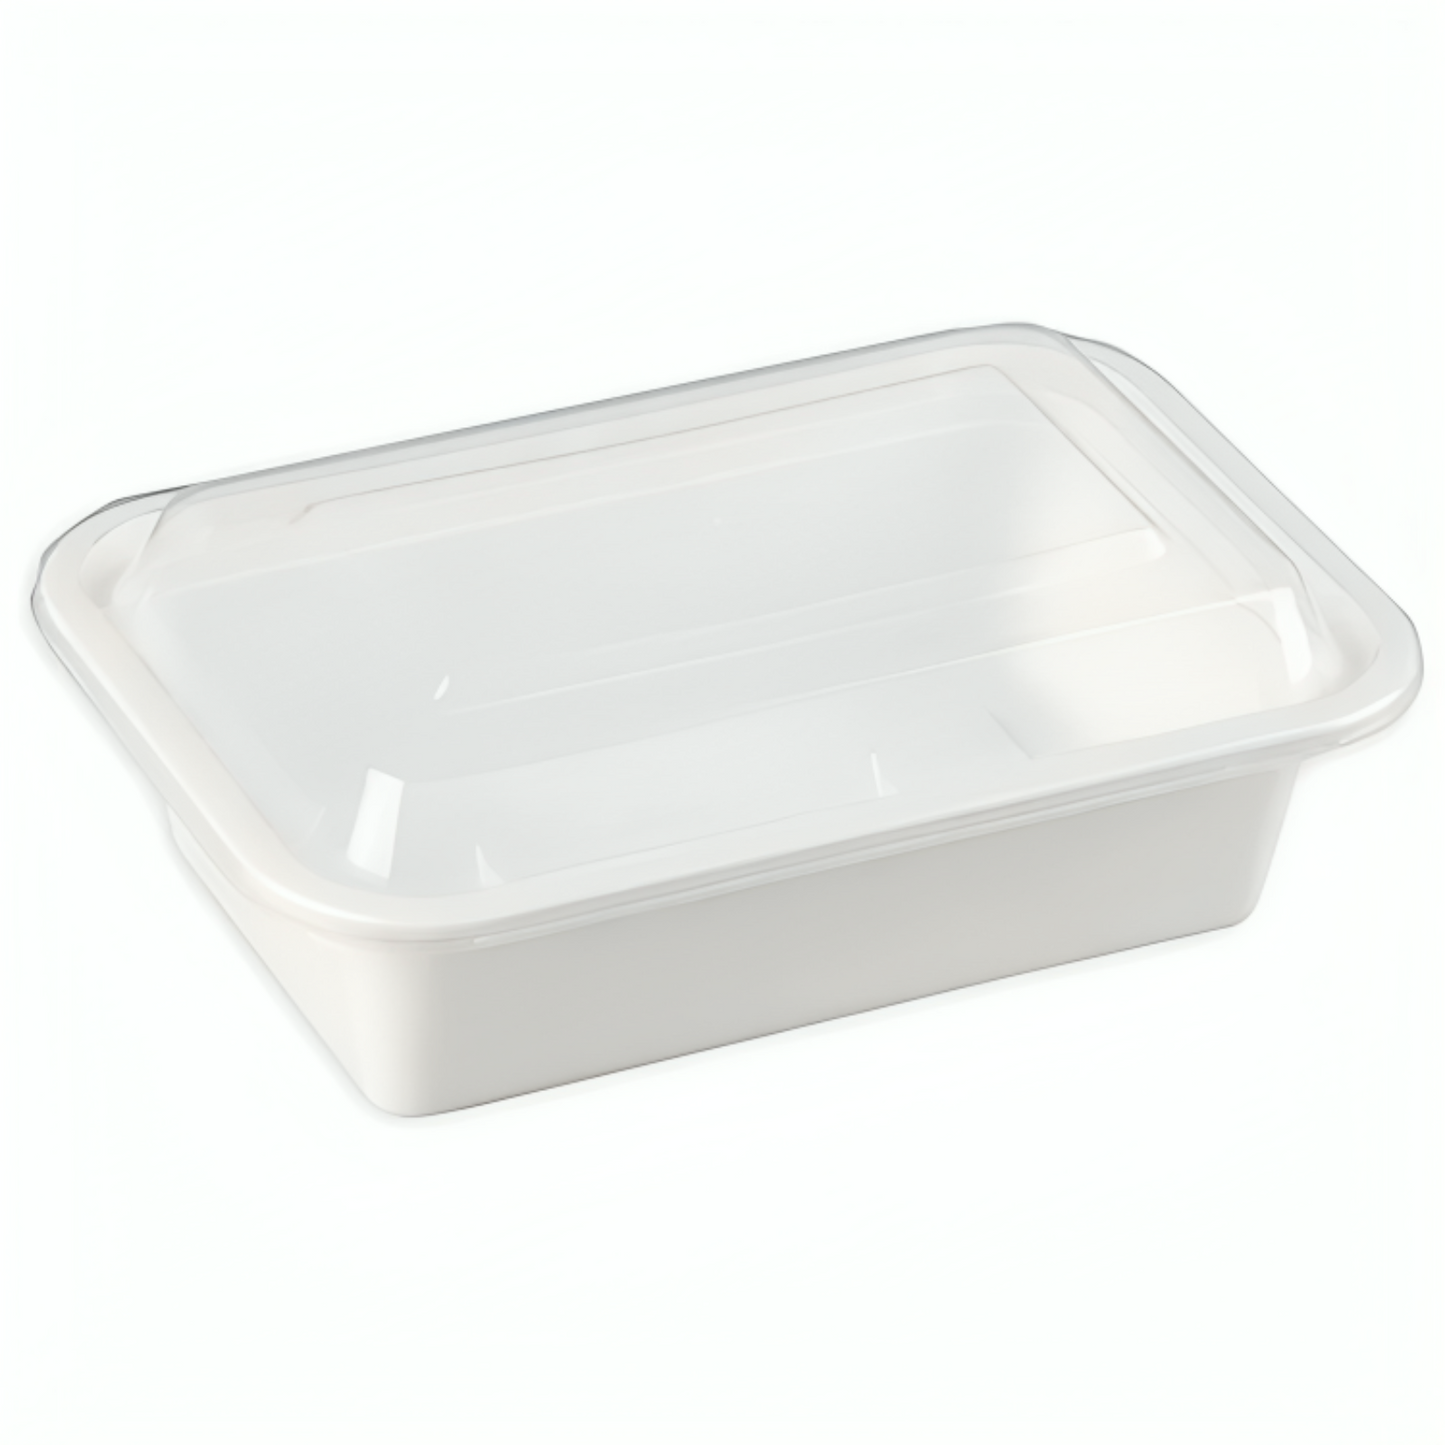 38oz Extra Strong Quality White Rectangular Meal Prep/ Bento Box Container Food Storage & Serving VeZee   